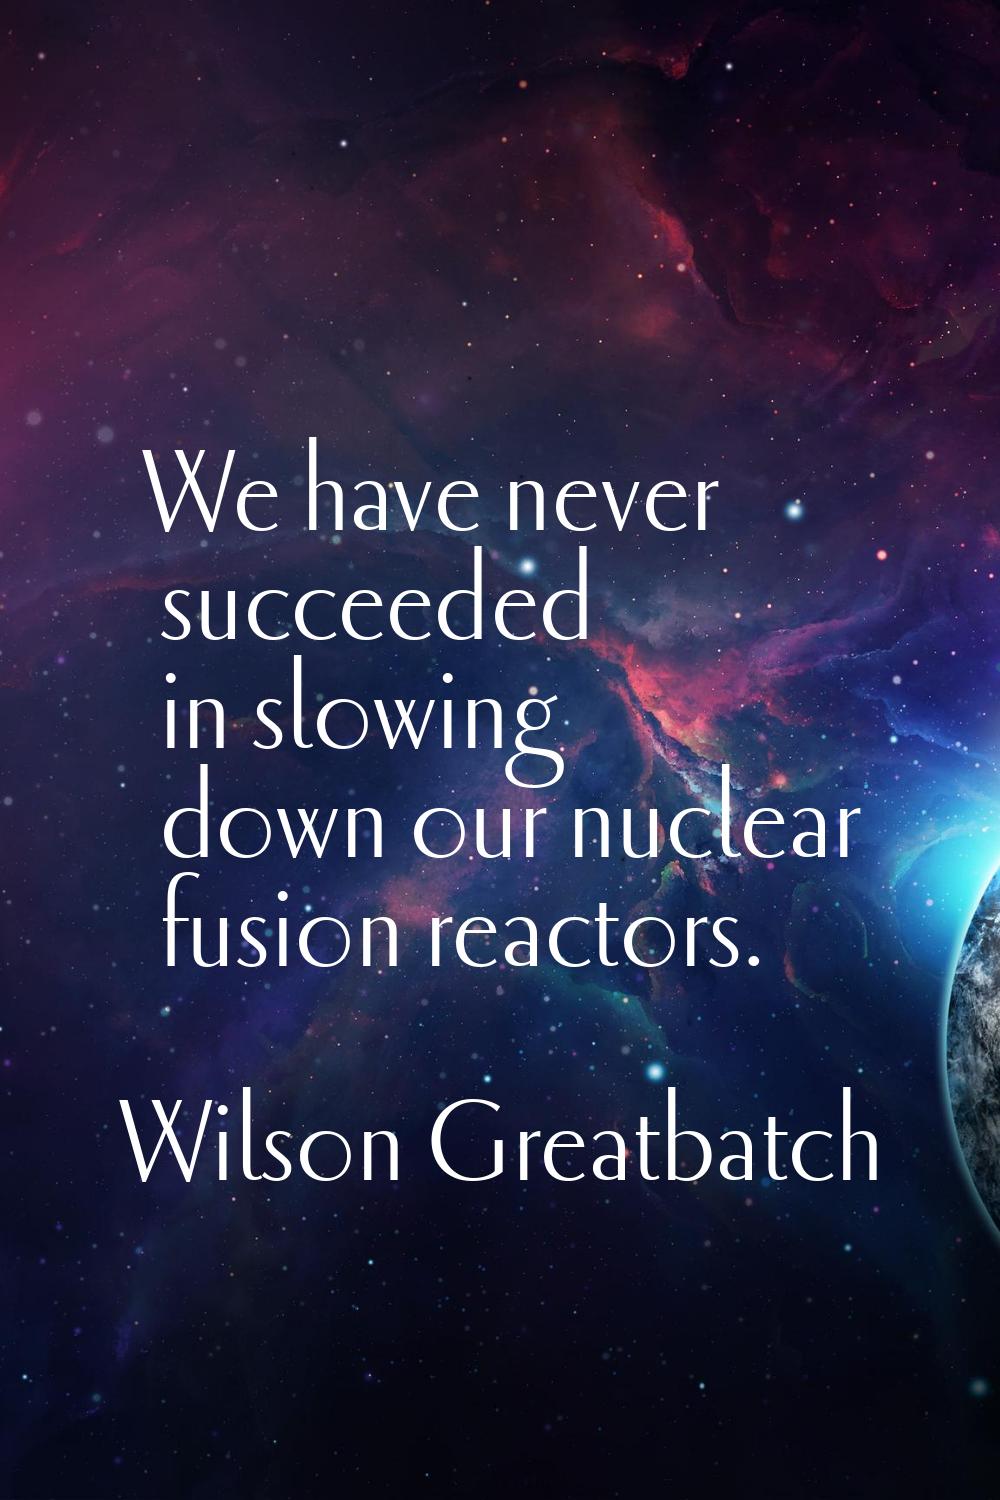 We have never succeeded in slowing down our nuclear fusion reactors.